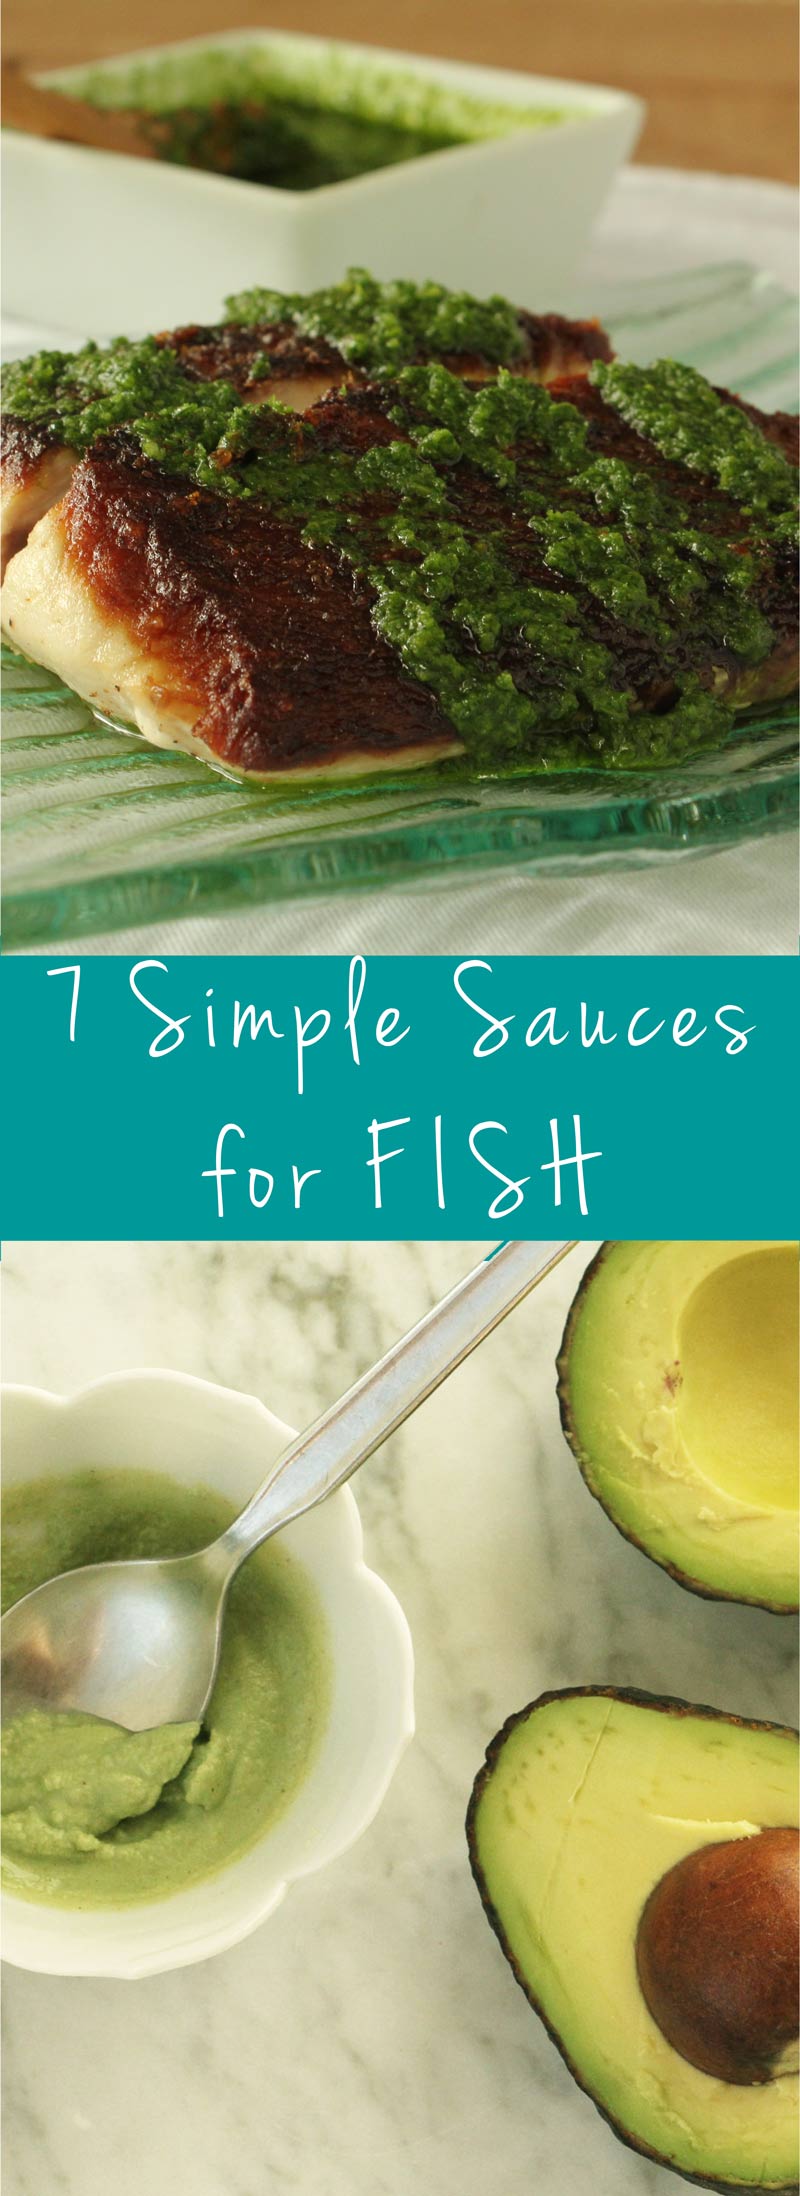 seven-sauces-for-fish